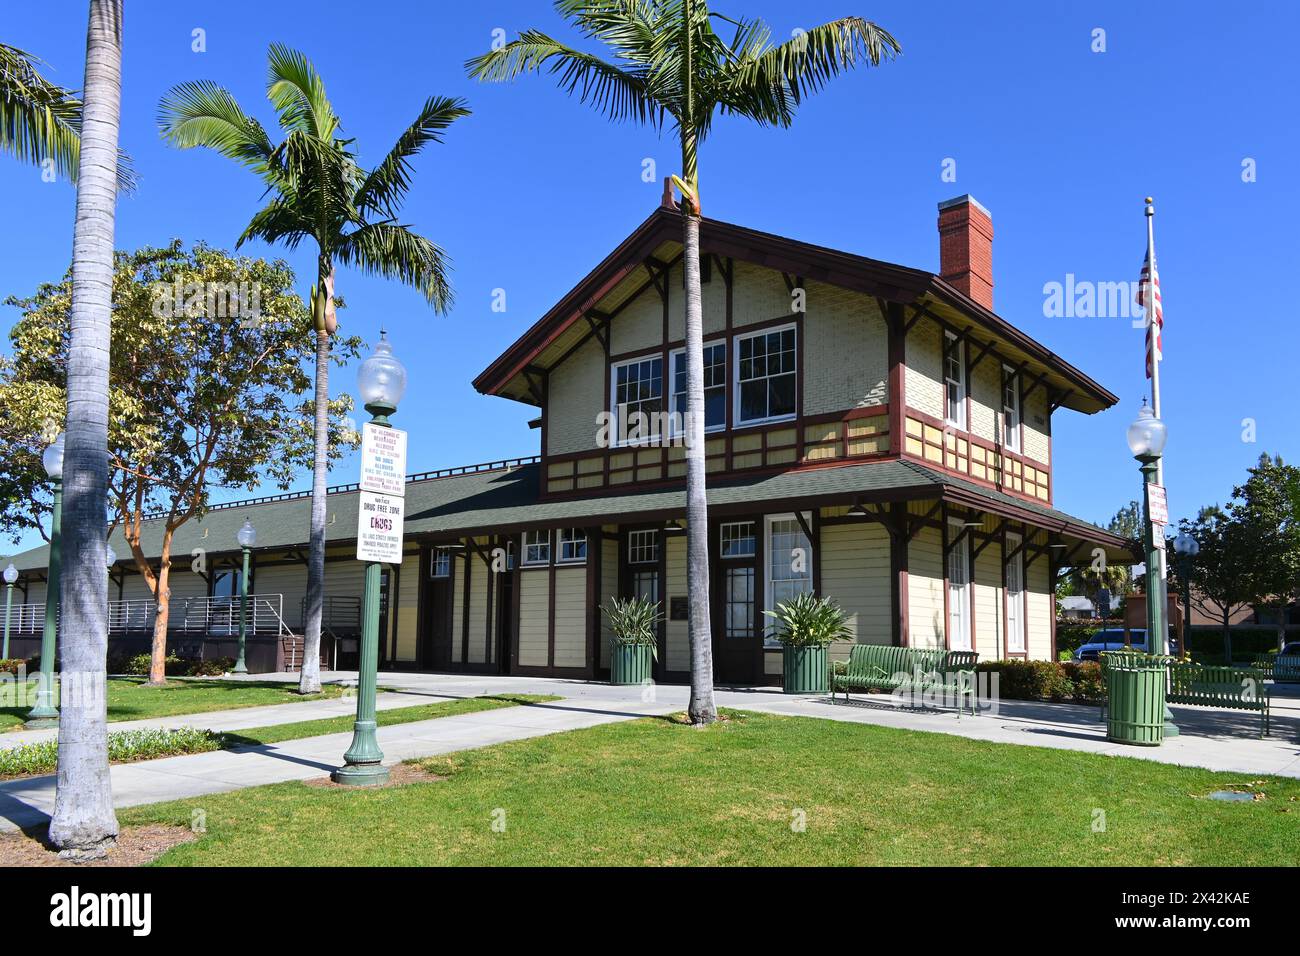 WHITTIER, CALIFORNIA - 28 APR 2024: The Whittier Transportation Center, is a train depot built in 1892 that is being preserved to house a railroad mus Stock Photo